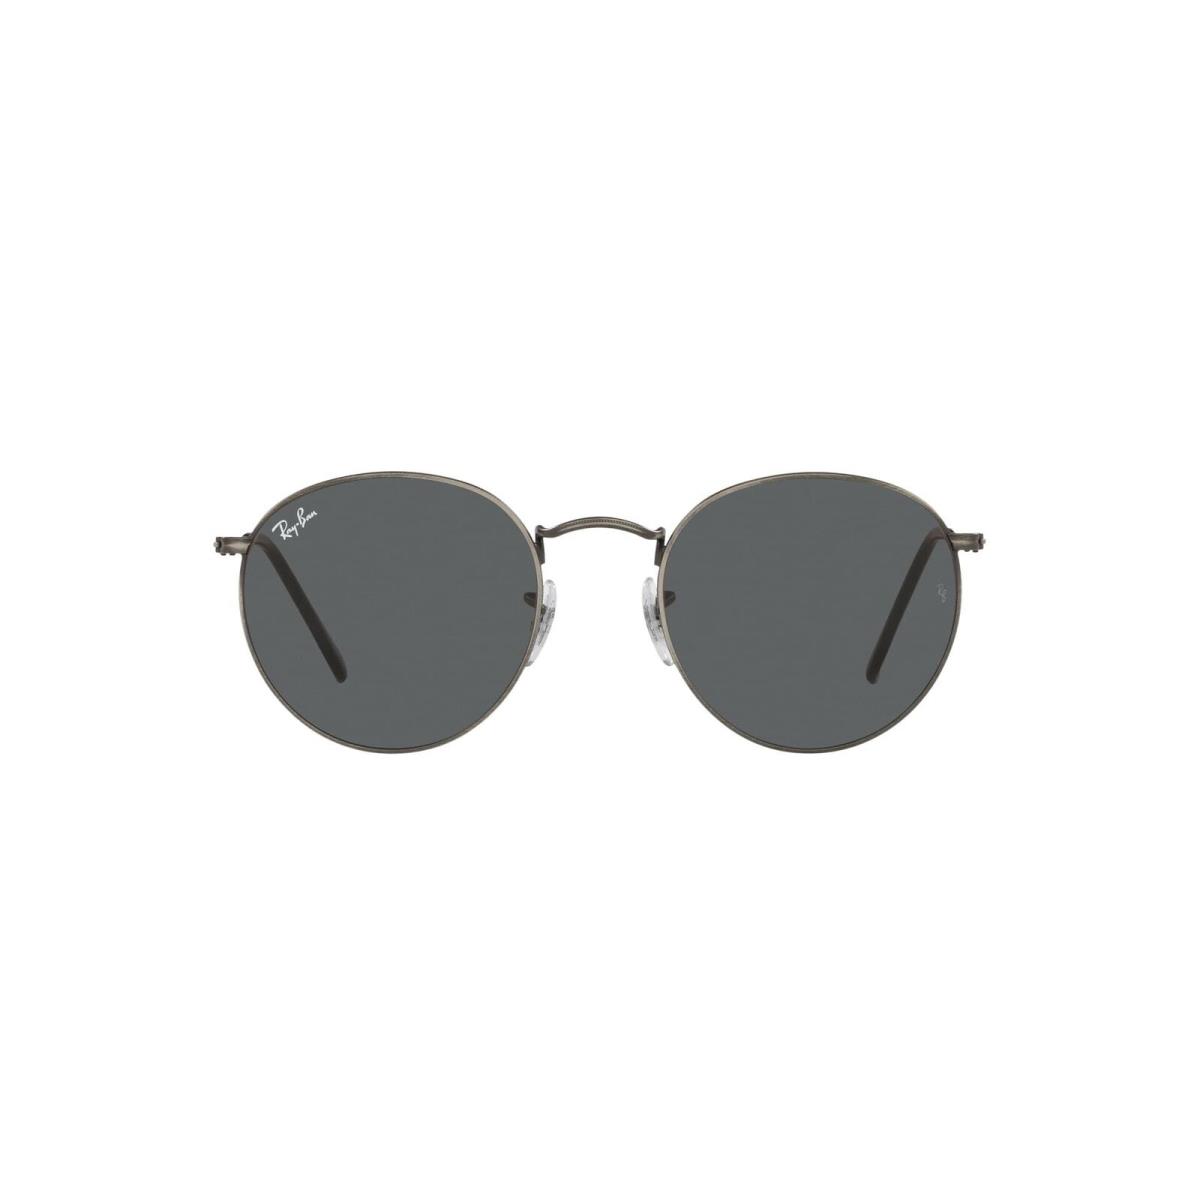 Ray-ban Rb3447 Round Metal Sunglasses Antique Gunmetal/dark Grey 53 mm - Antique Gunmetal/Dark Grey